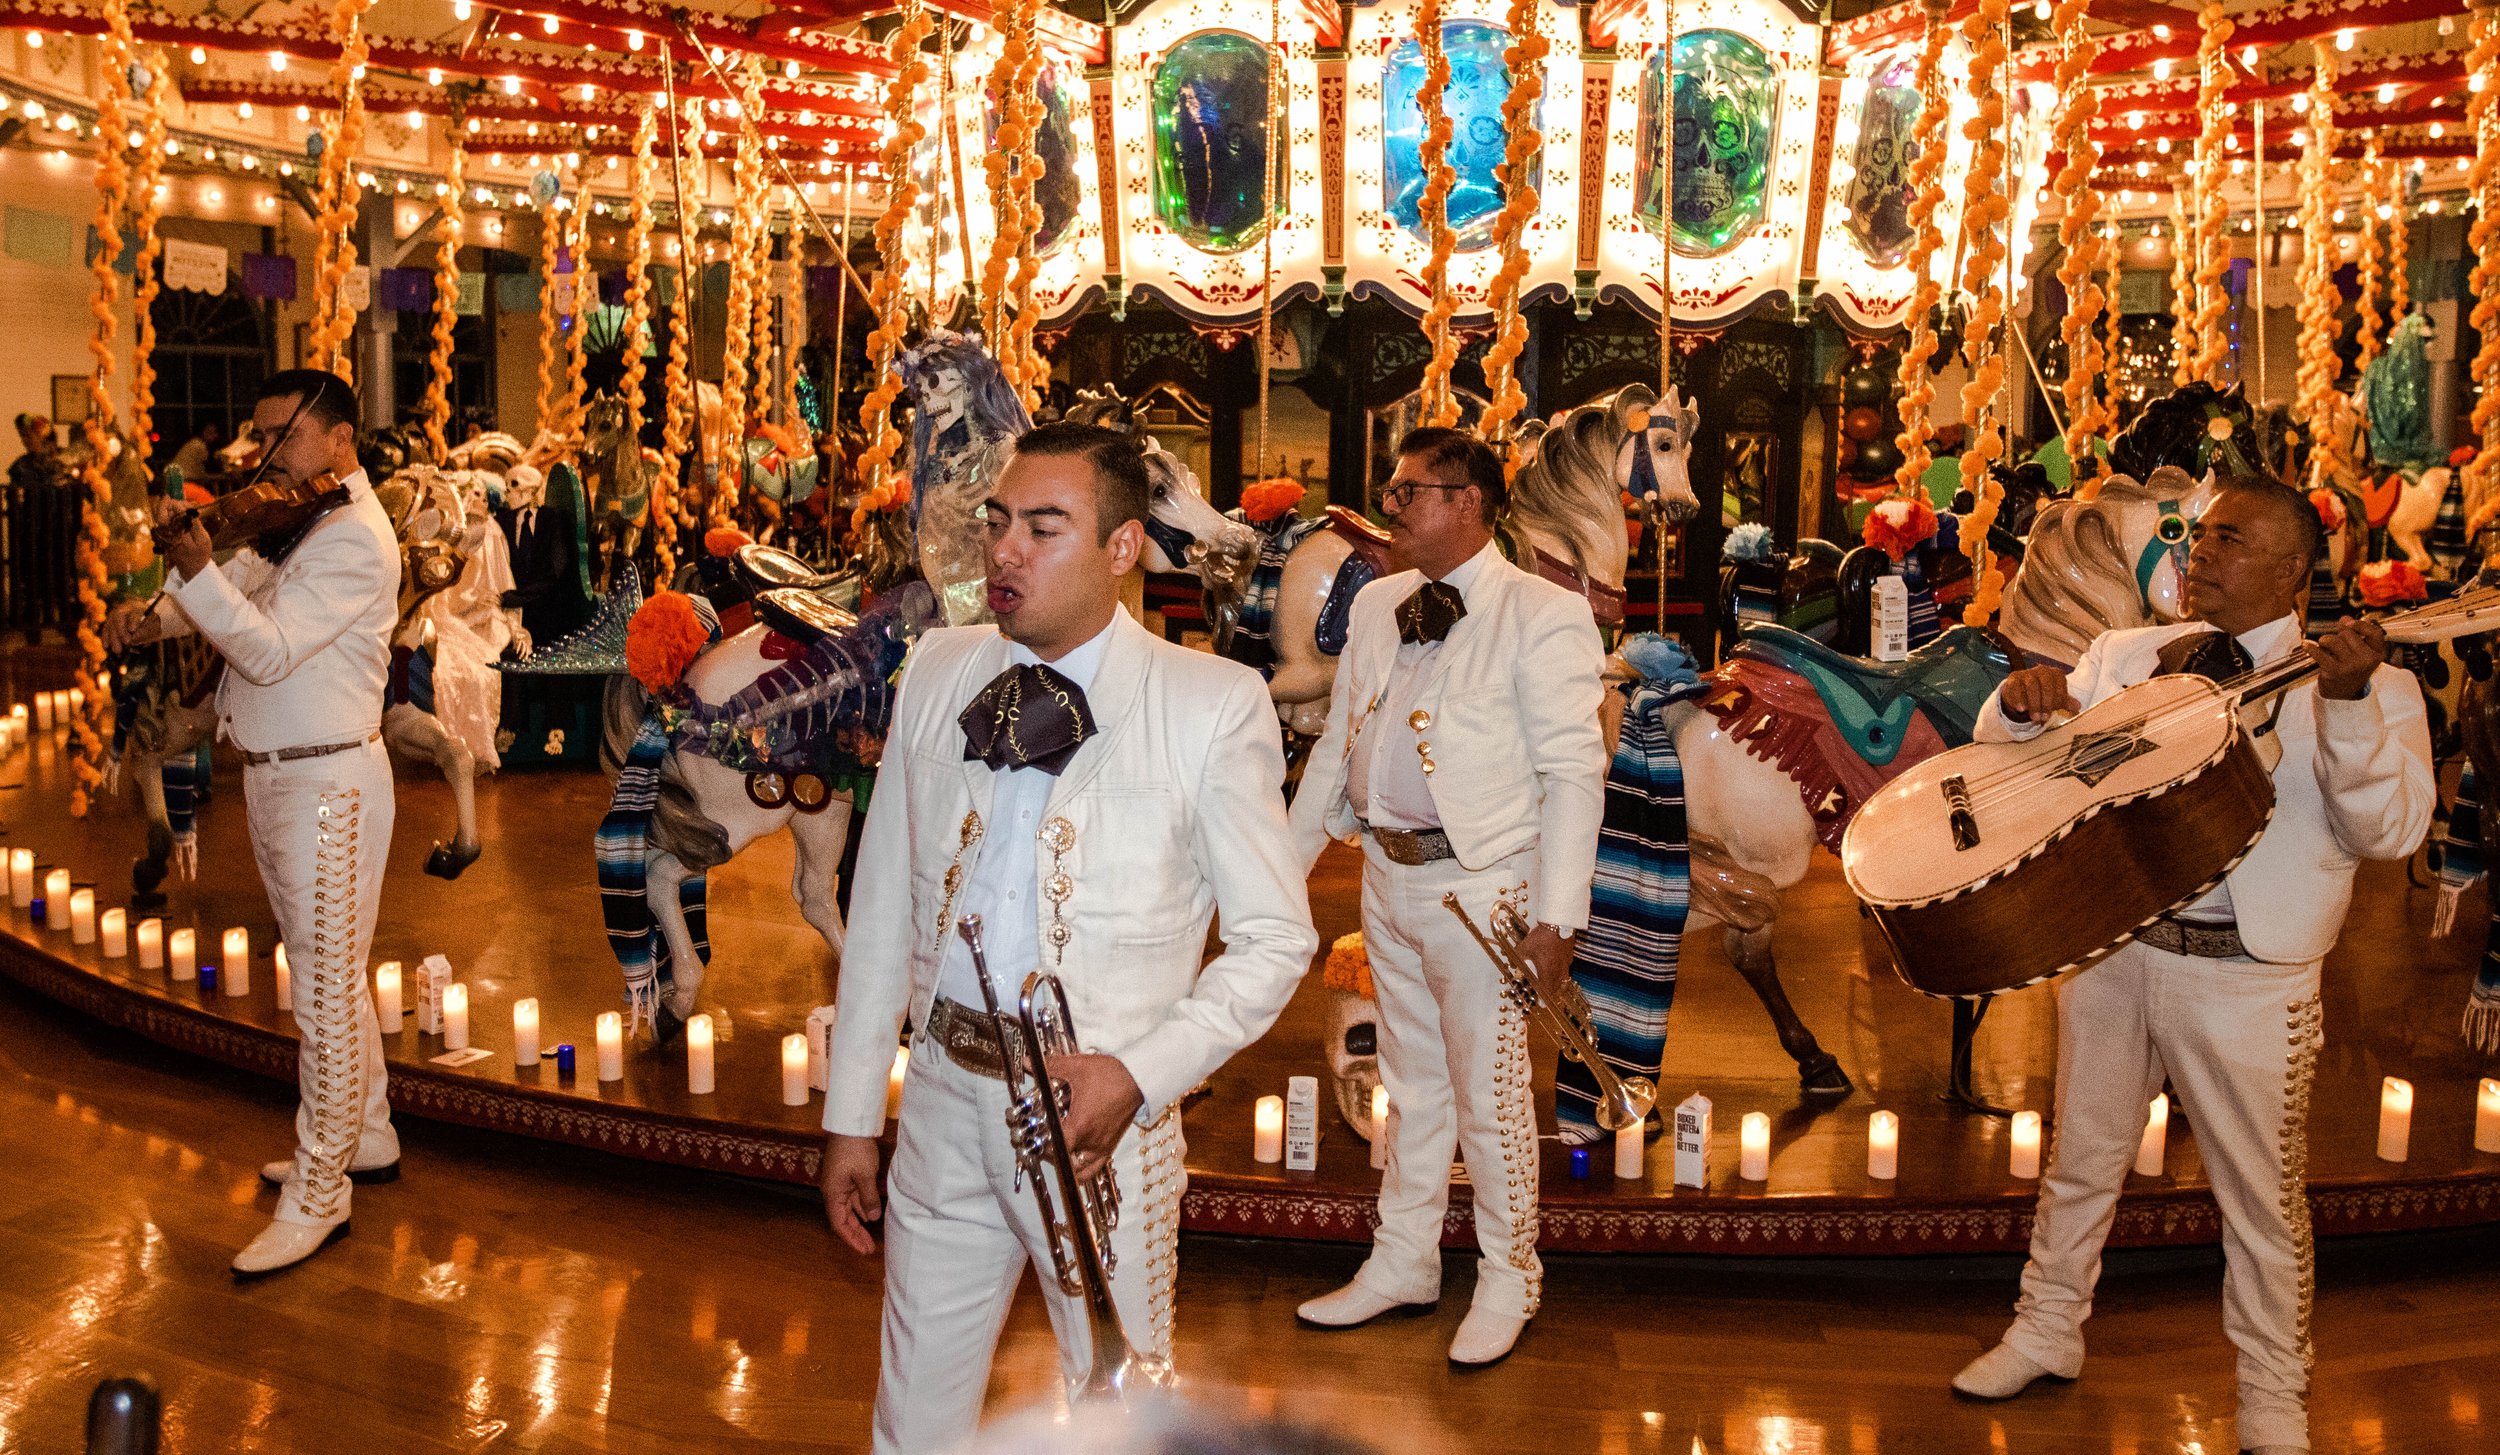  The live mariachi which performed for the Santa Monica Pier Día de los Muertos celebration on Nov. 2, 2022. In collaboration with artists, Daniel Alonzo and Sylvia Sanchez, Santa Monica Pier showcased a two-day public art installation in which commu